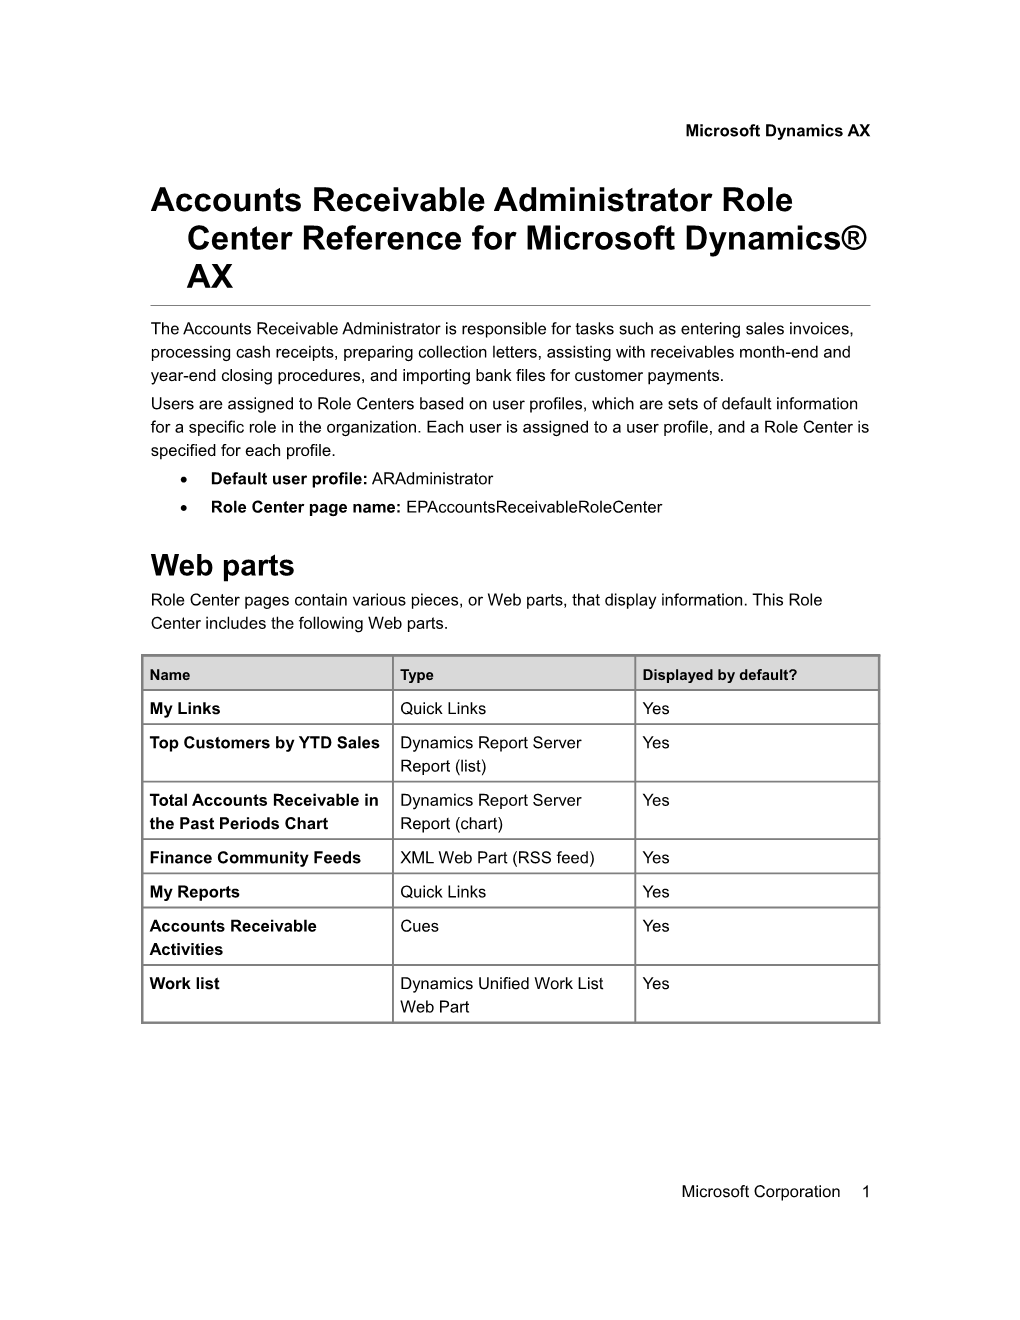 Accounts Receivable Administrator Role Center Reference